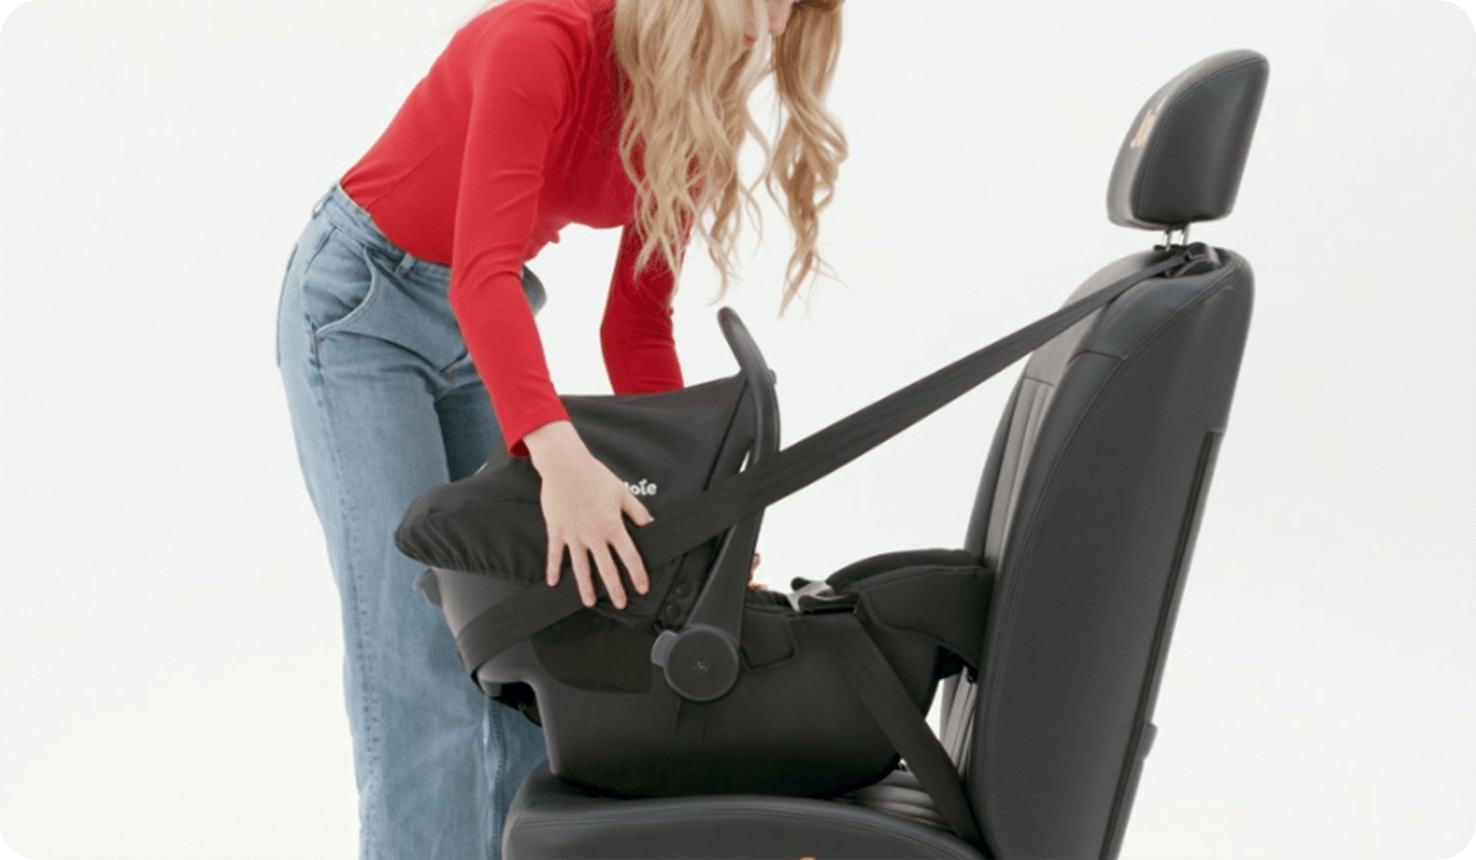 Woman installing Joie i-Juva infant car seat on a seat with the seatbelt.